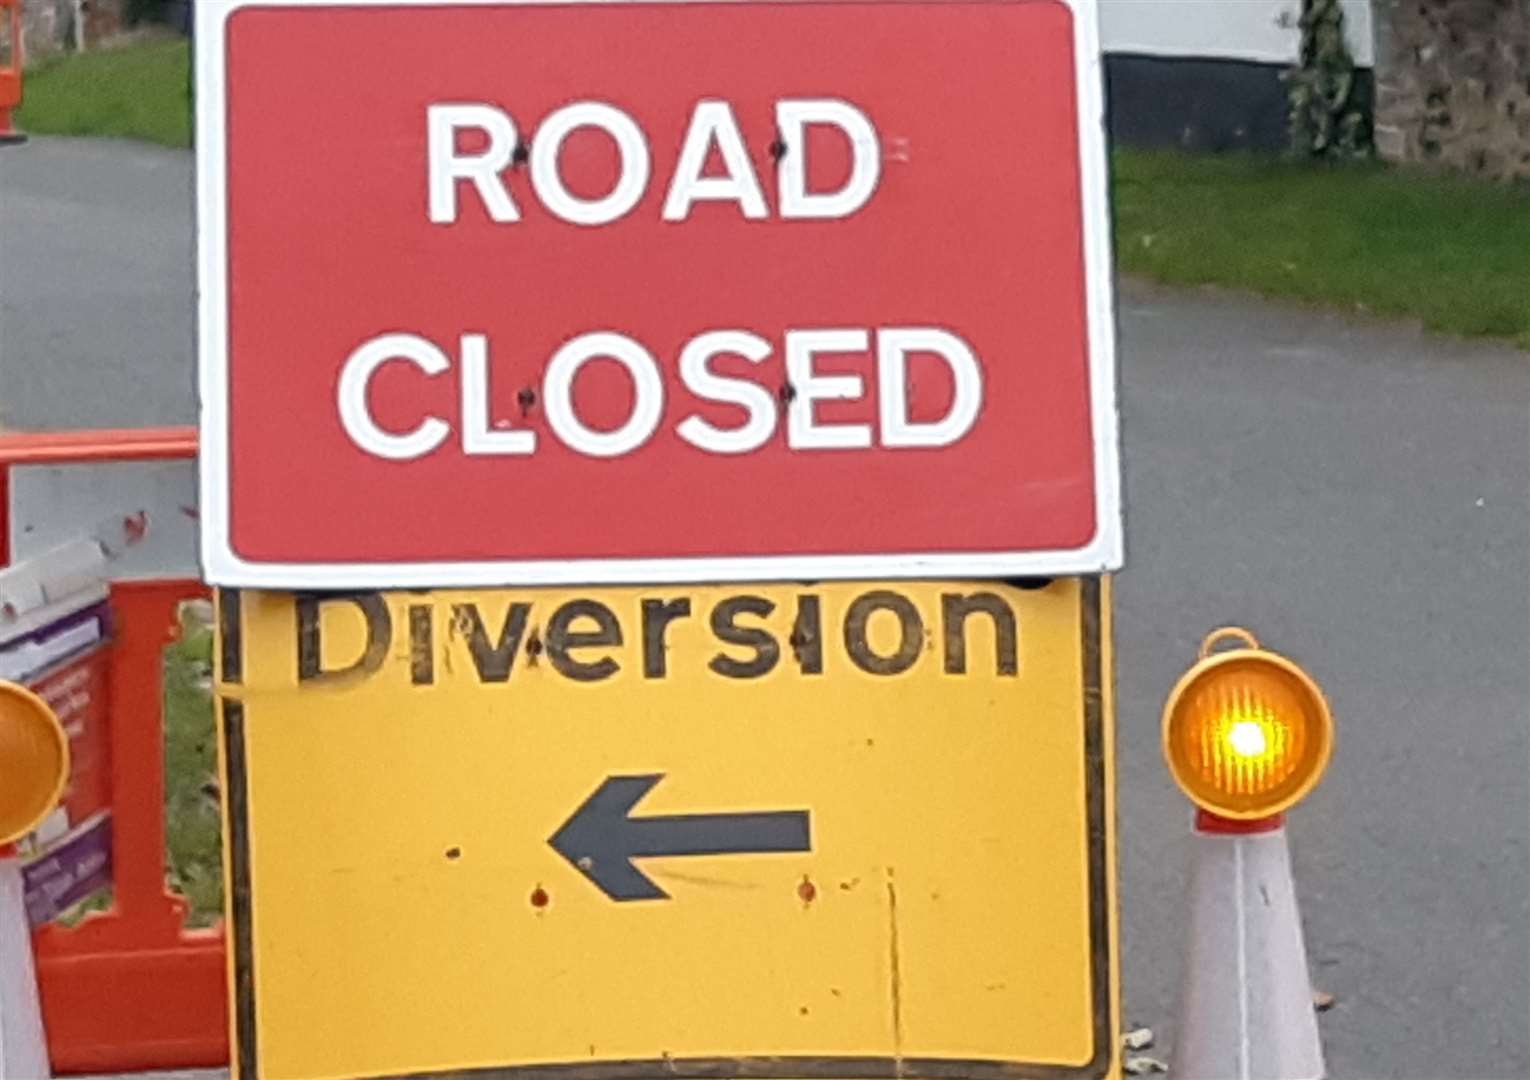 Road closed sign. Stock image